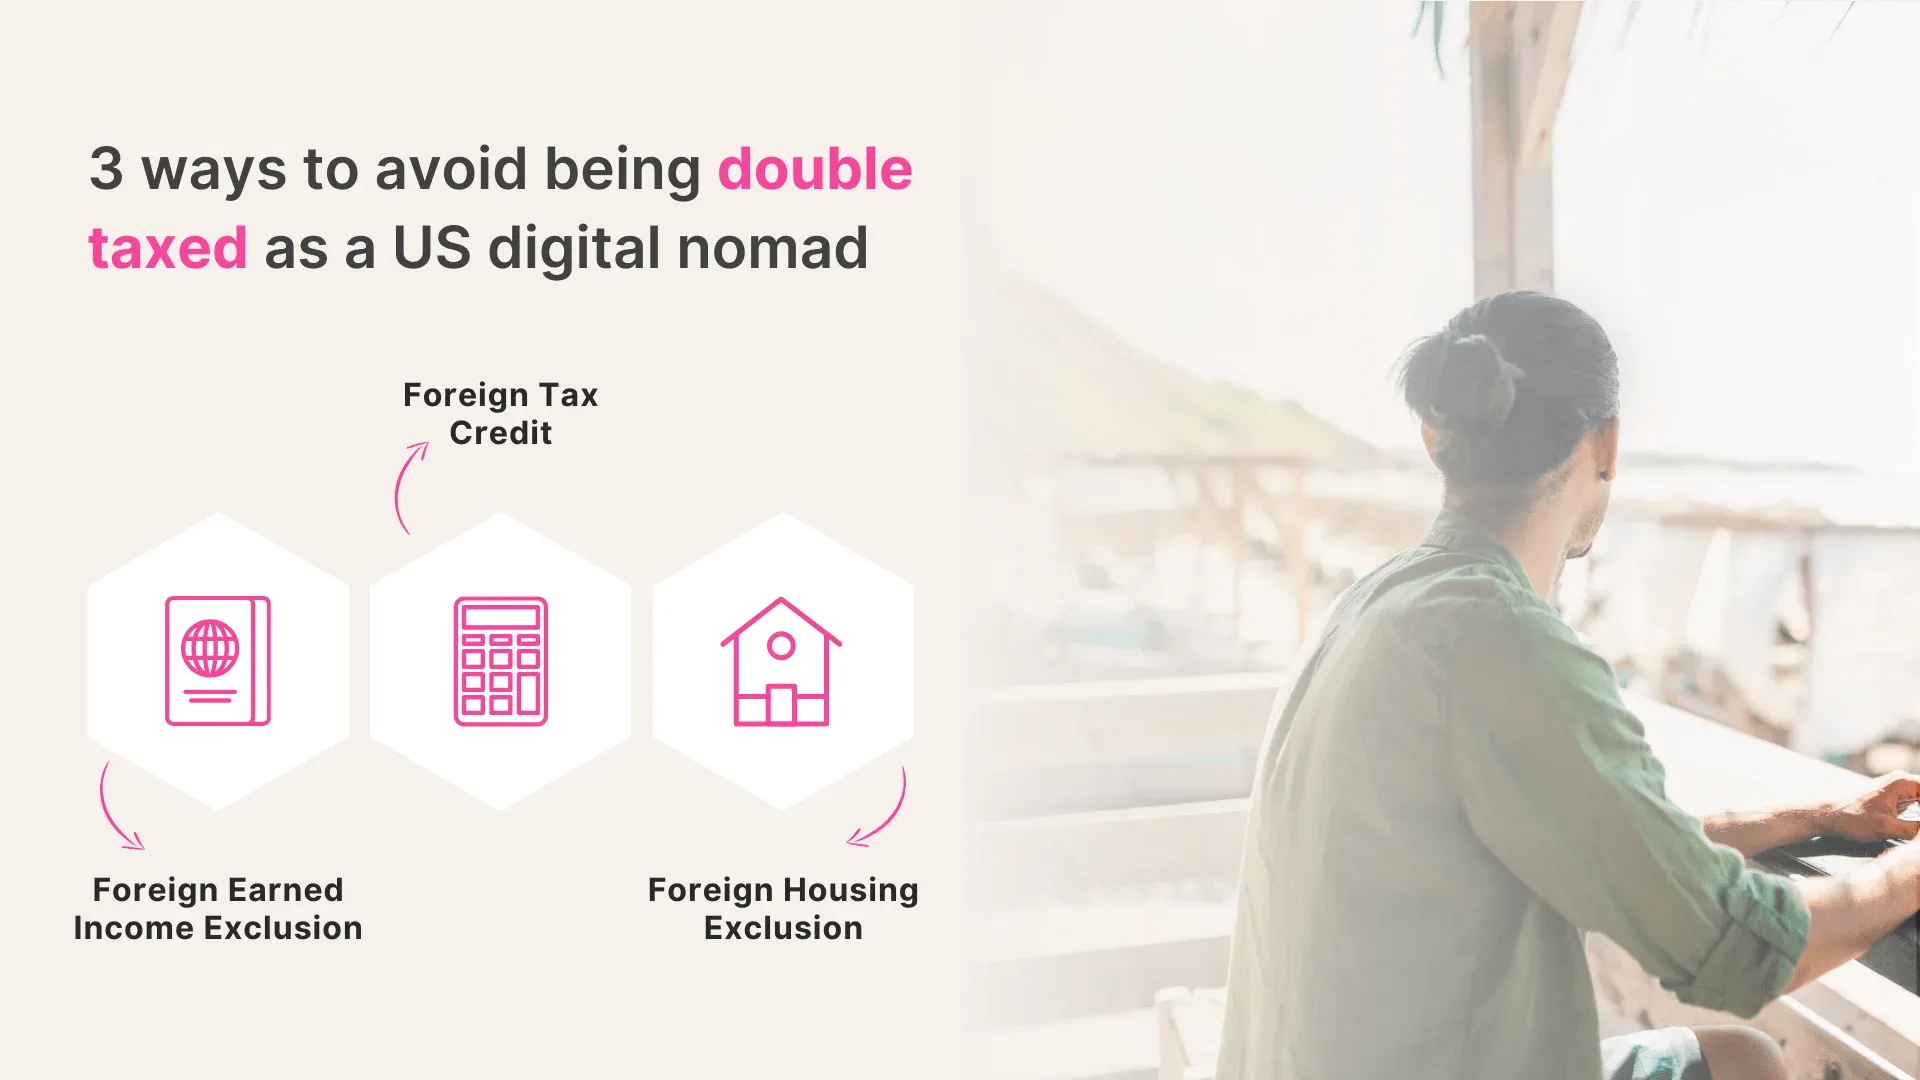 How to avoid double taxation as a US digital nomad